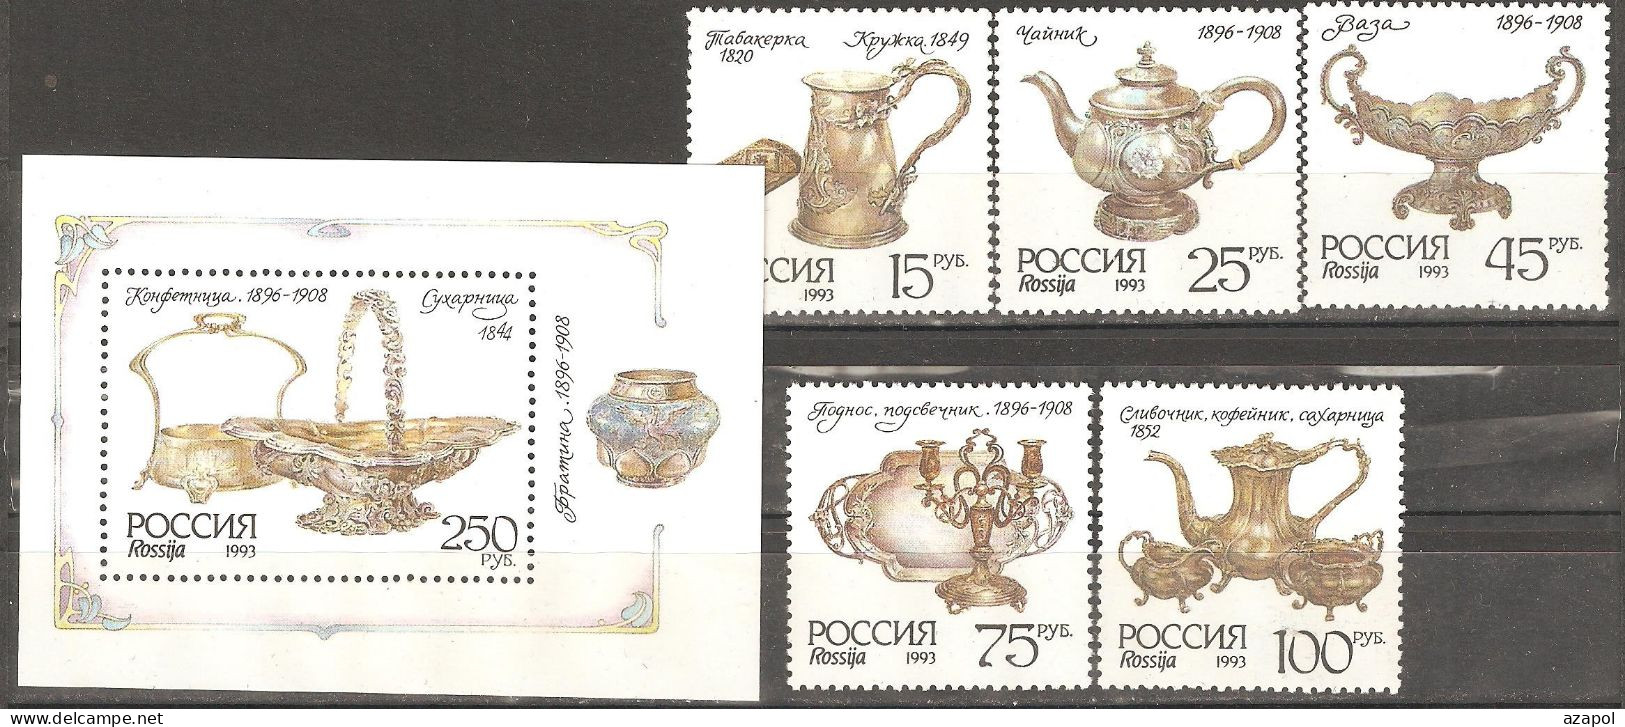 Russian Silverware: Full Set Of 5 Mint Stamps And Block, Russia, 1992, Mi#308-311, Bl-5, MNH - Musées